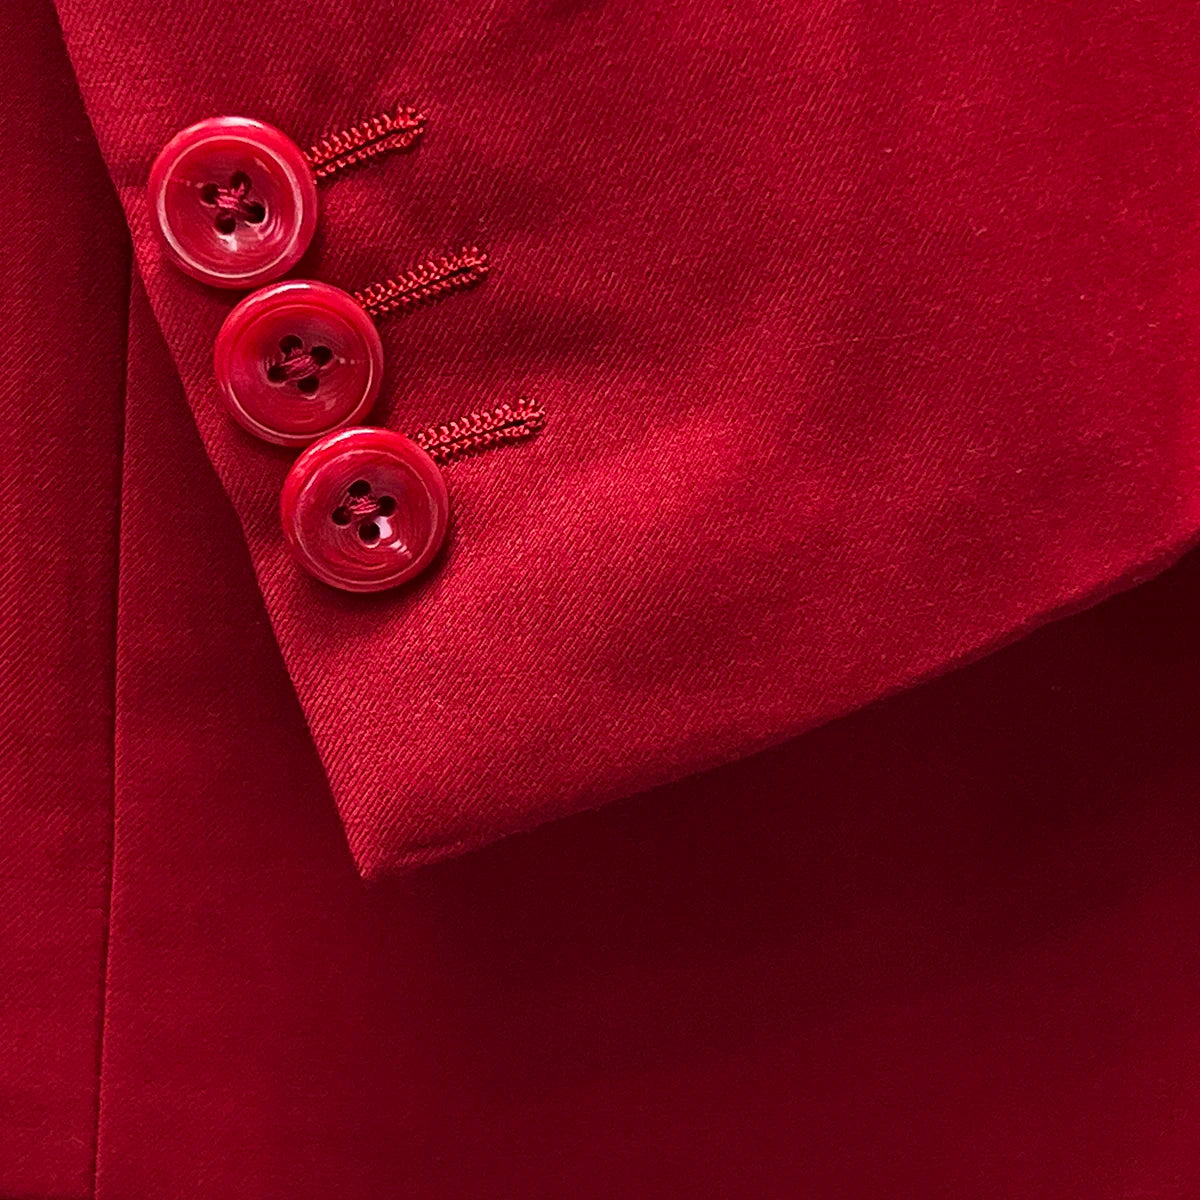 sleeve buttonholes allowing for precise sleeve length adjustment on a scarlet red, solid plain color suit.